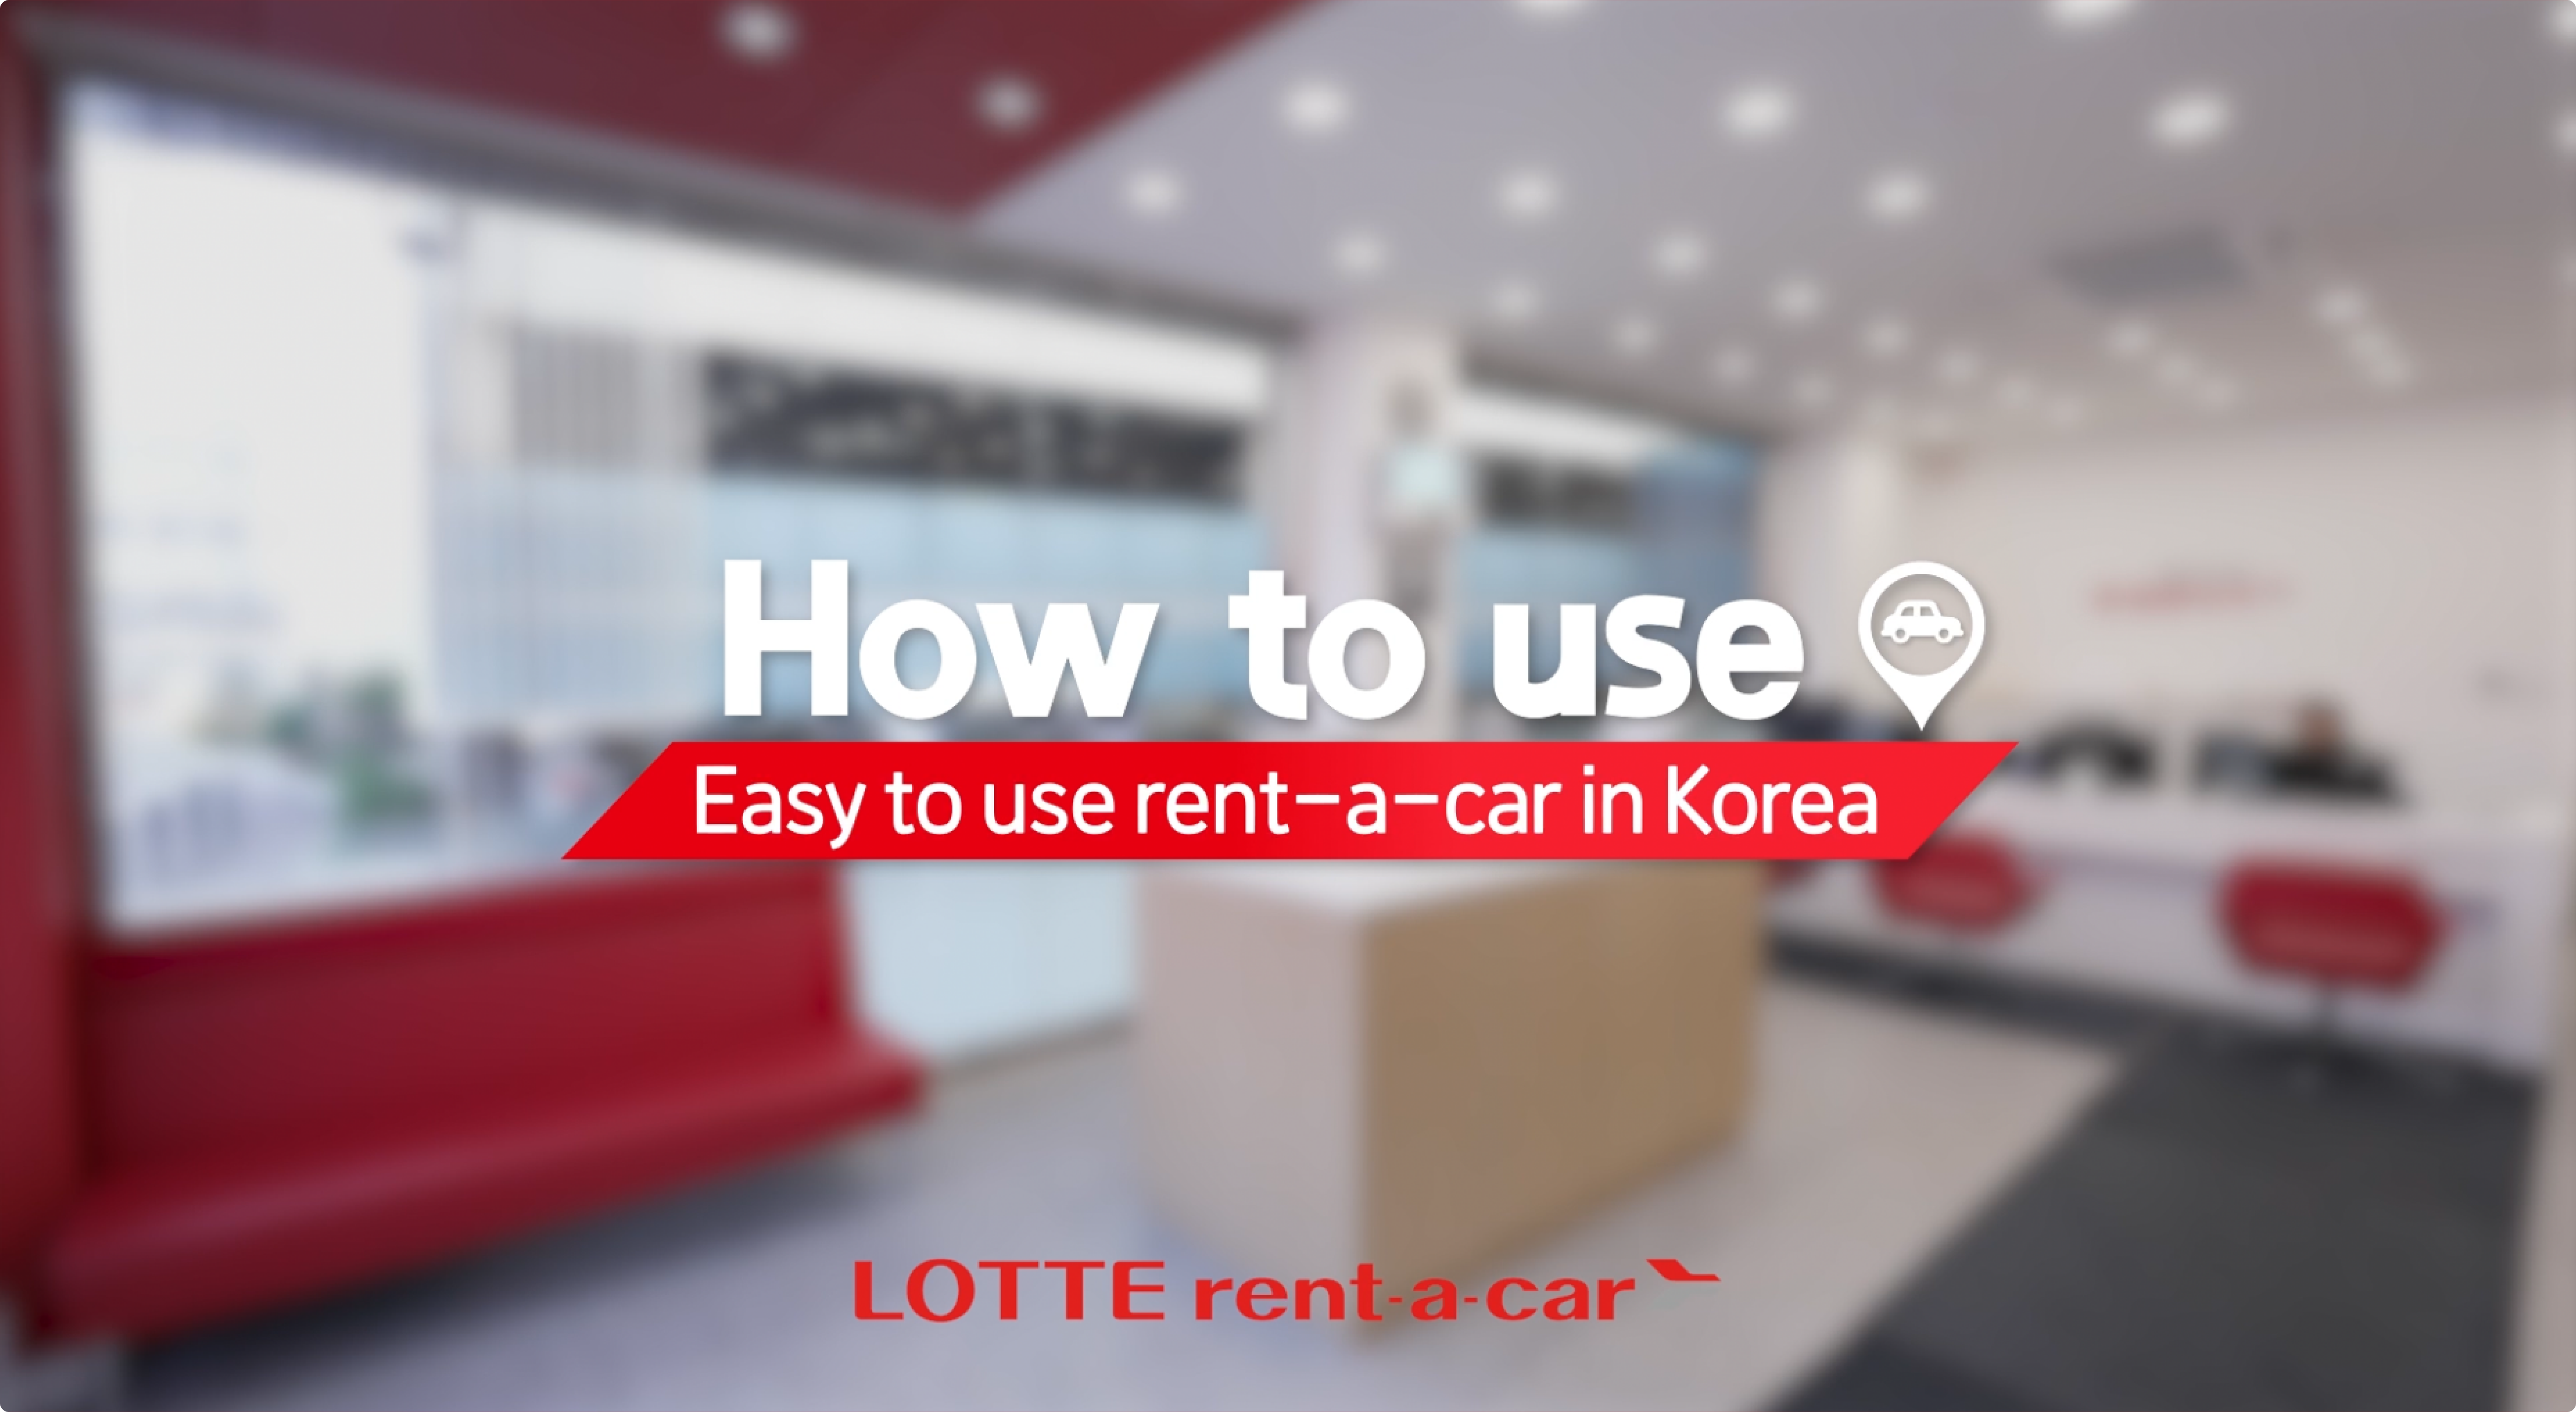 How to Use Car Rental Service in Korea - All about Rent-a-car